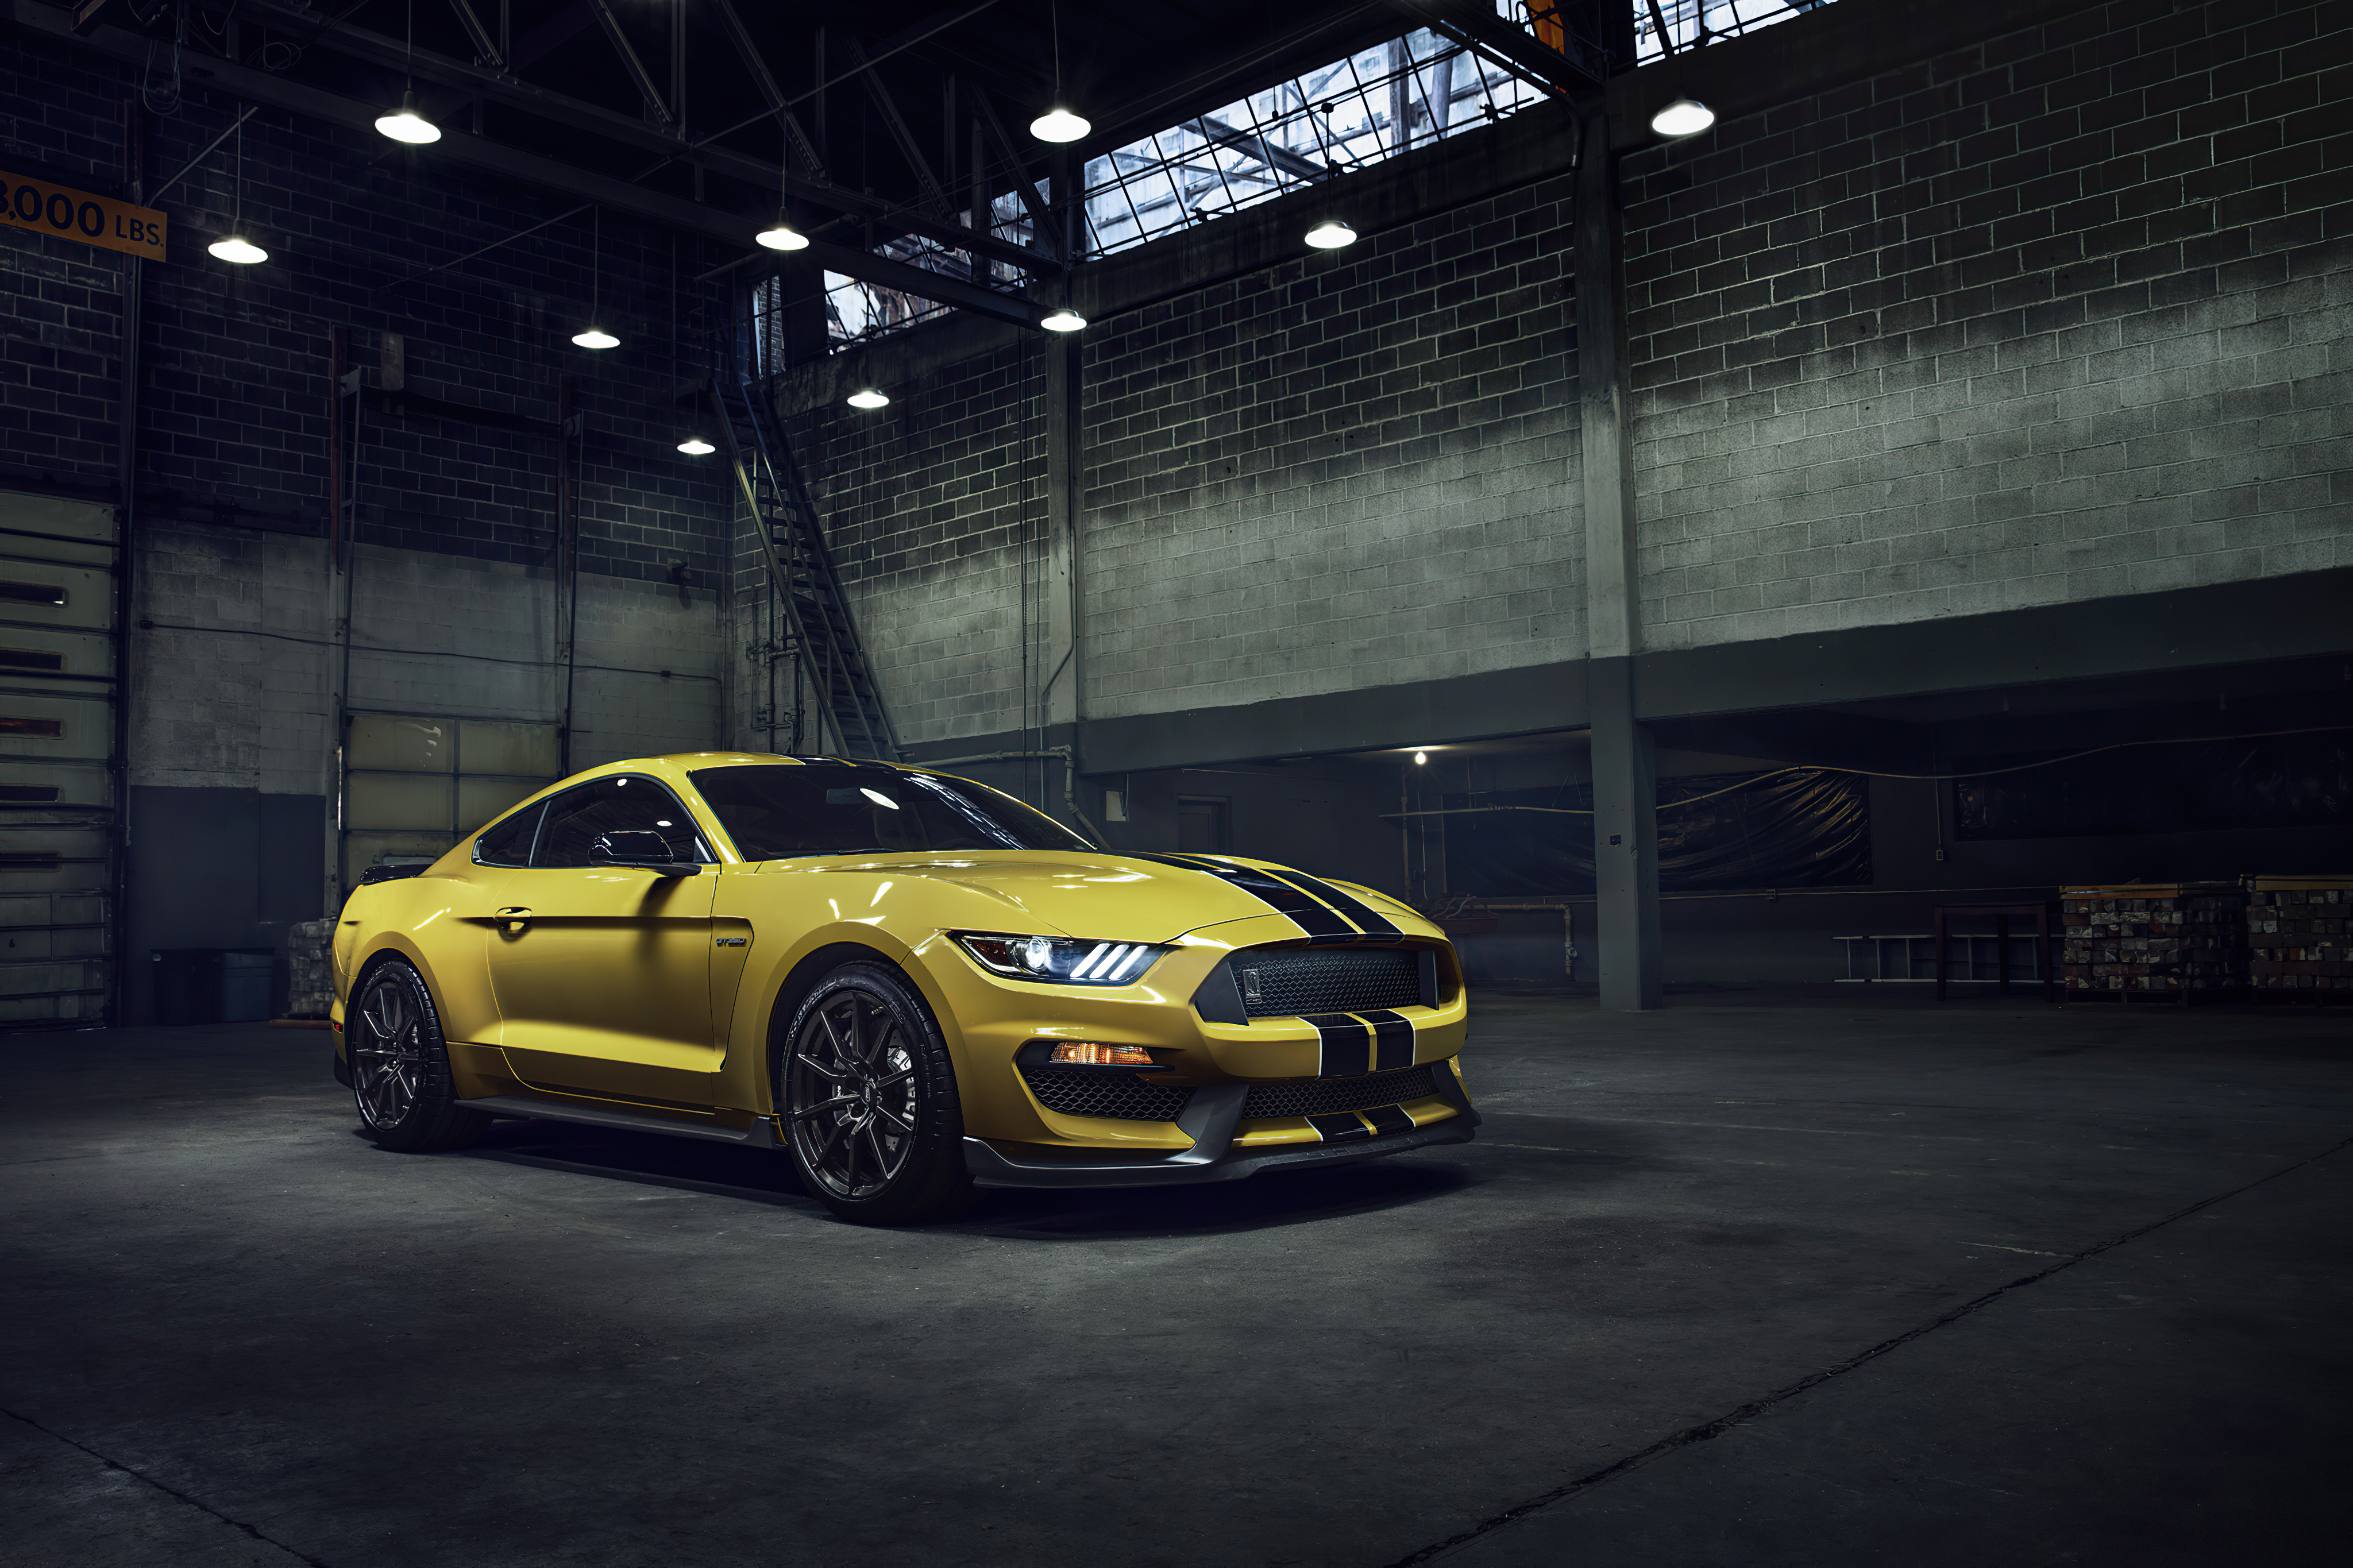 Ford Mustang GT350 4k Ultra HD Wallpaper by Paul Dupont